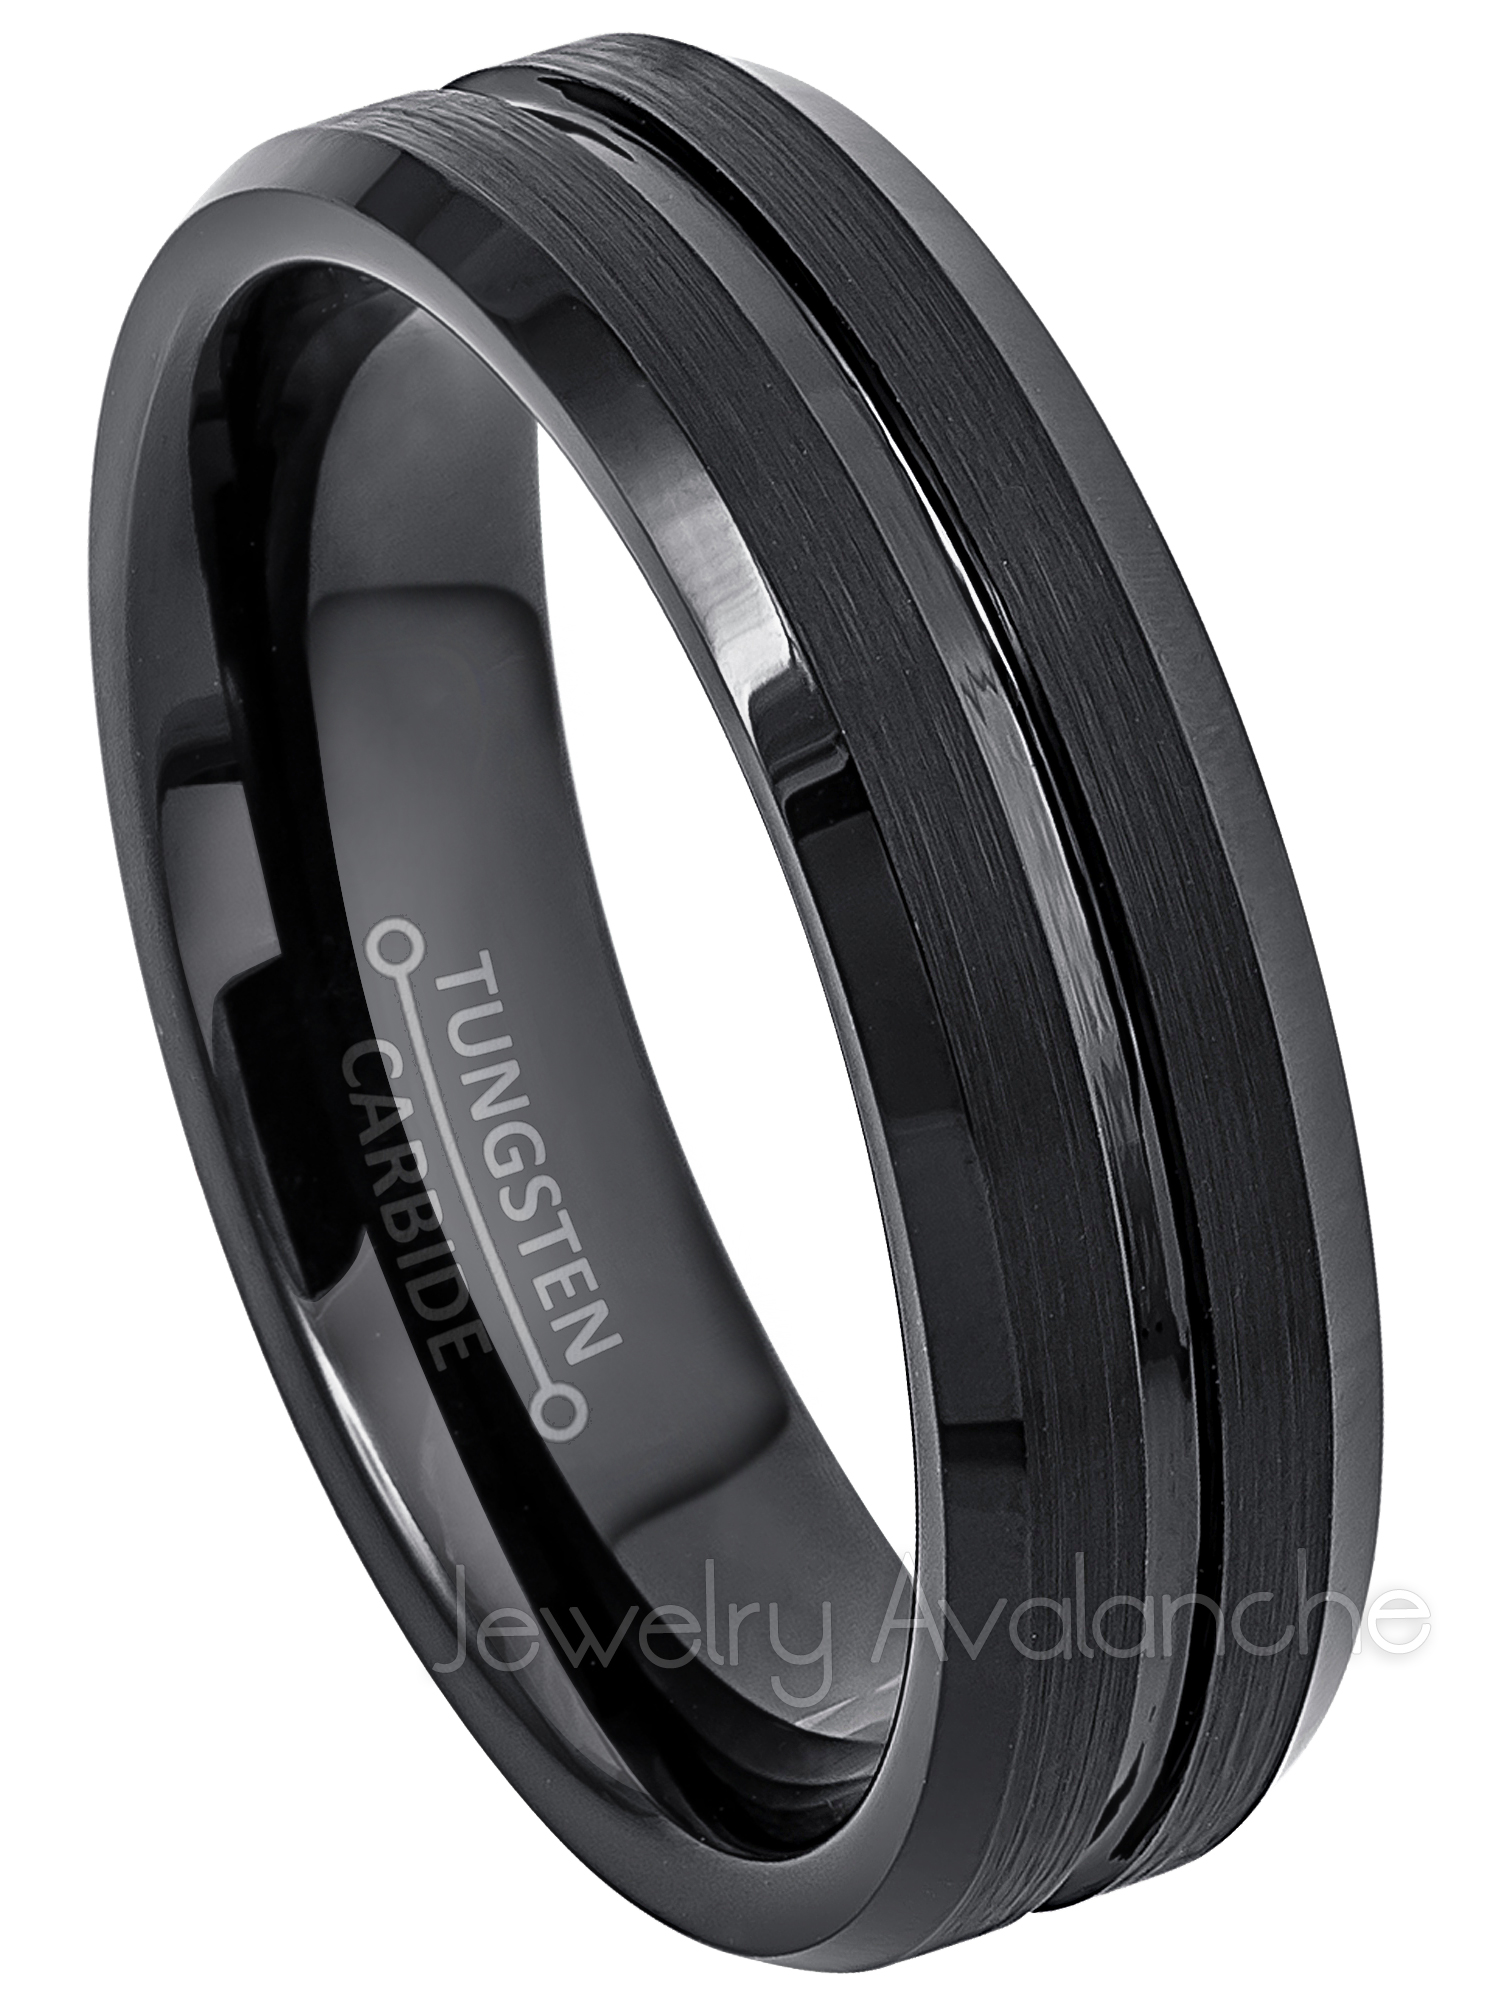 JA Tungsten Rings 6MM Black Tungsten Wedding Band Brushed Grooved Center Tungsten Carbide Ring Anniversary Band